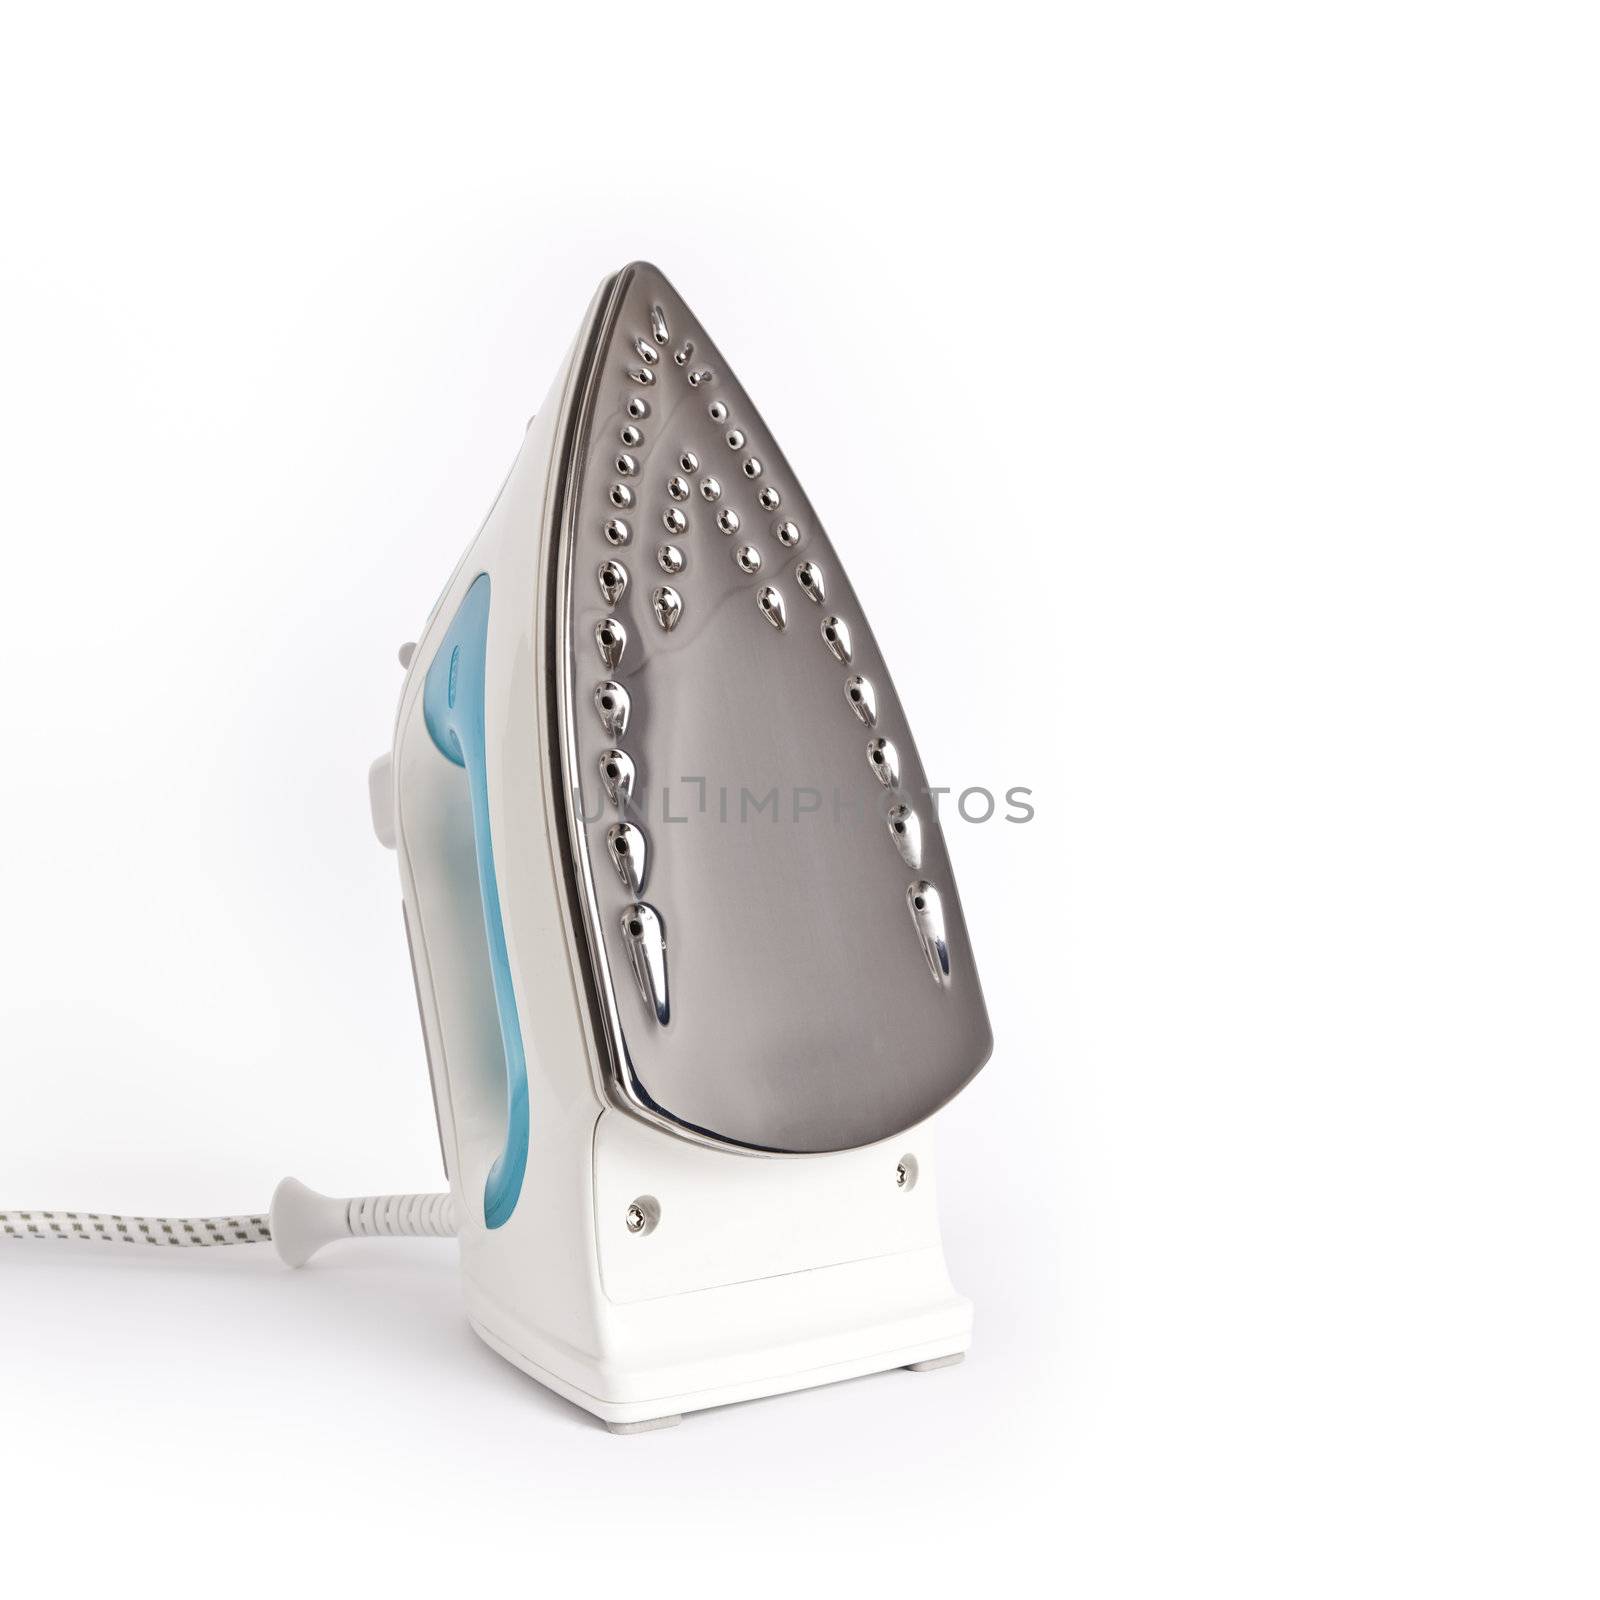 An image of a steam iron on white background